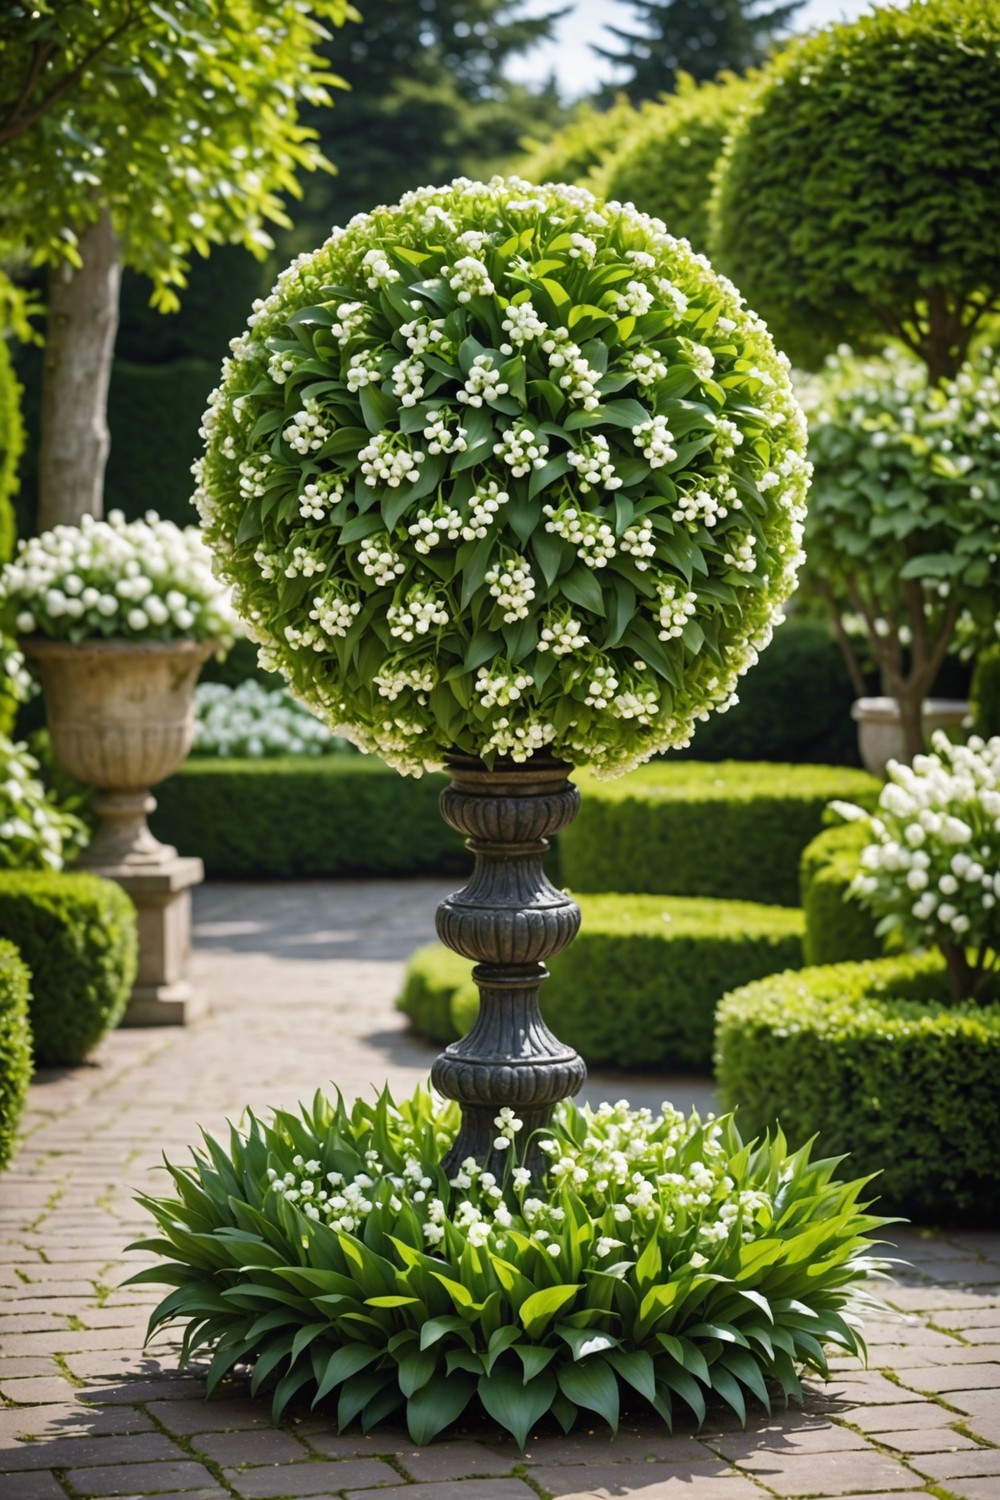 Make a Lily of the Valley Topiary for a Unique Garden Ornament